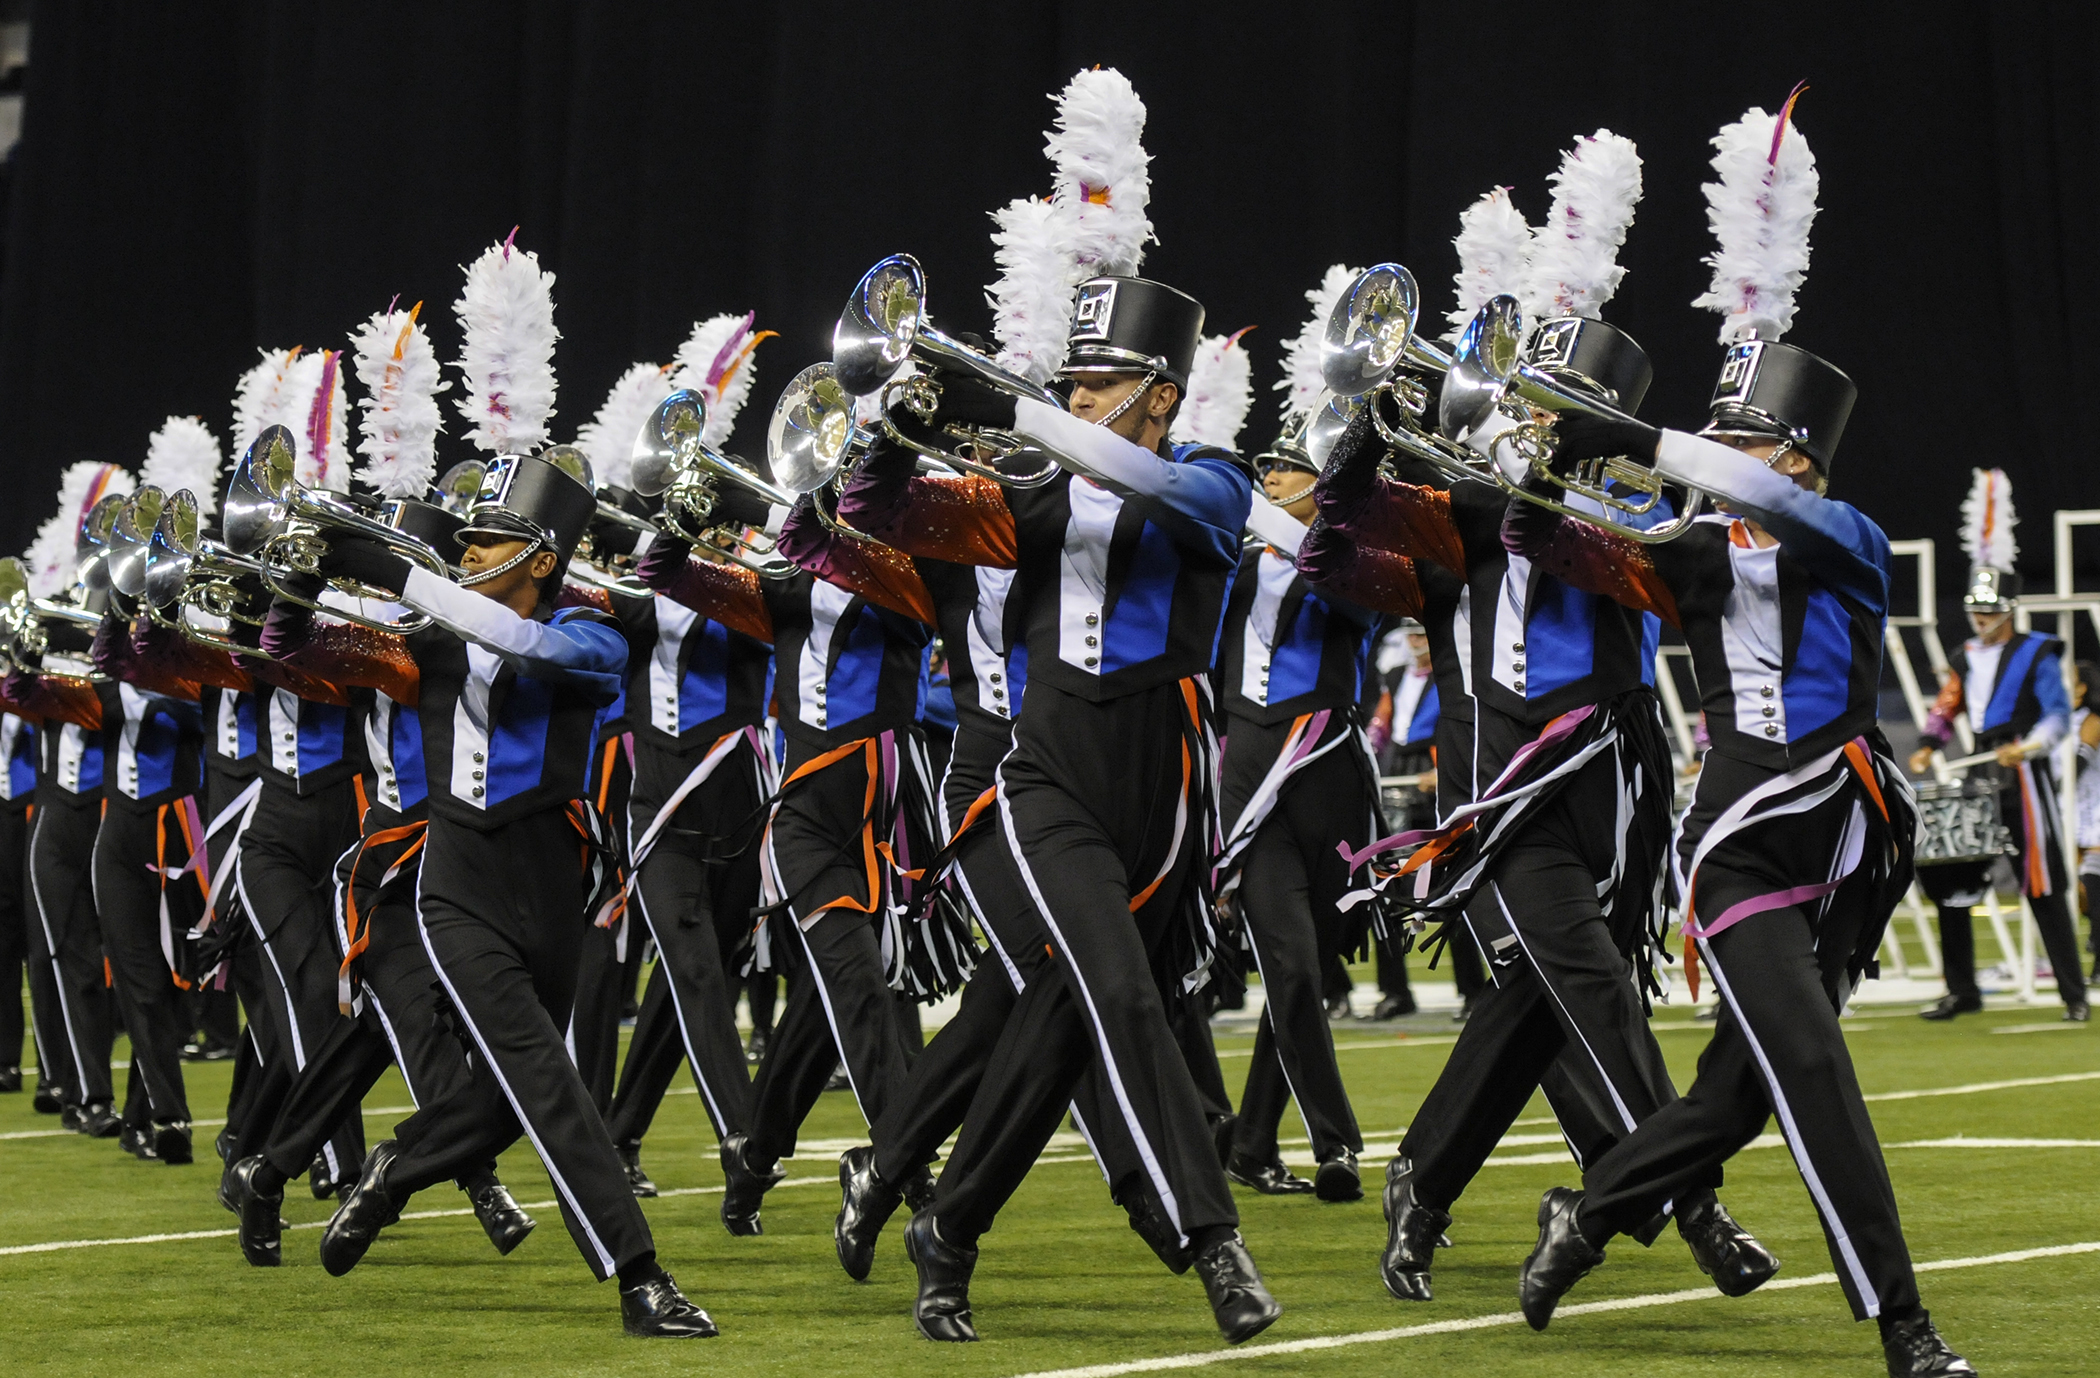 Drum Corps International Shatters Attendance Records Nationwide Showing